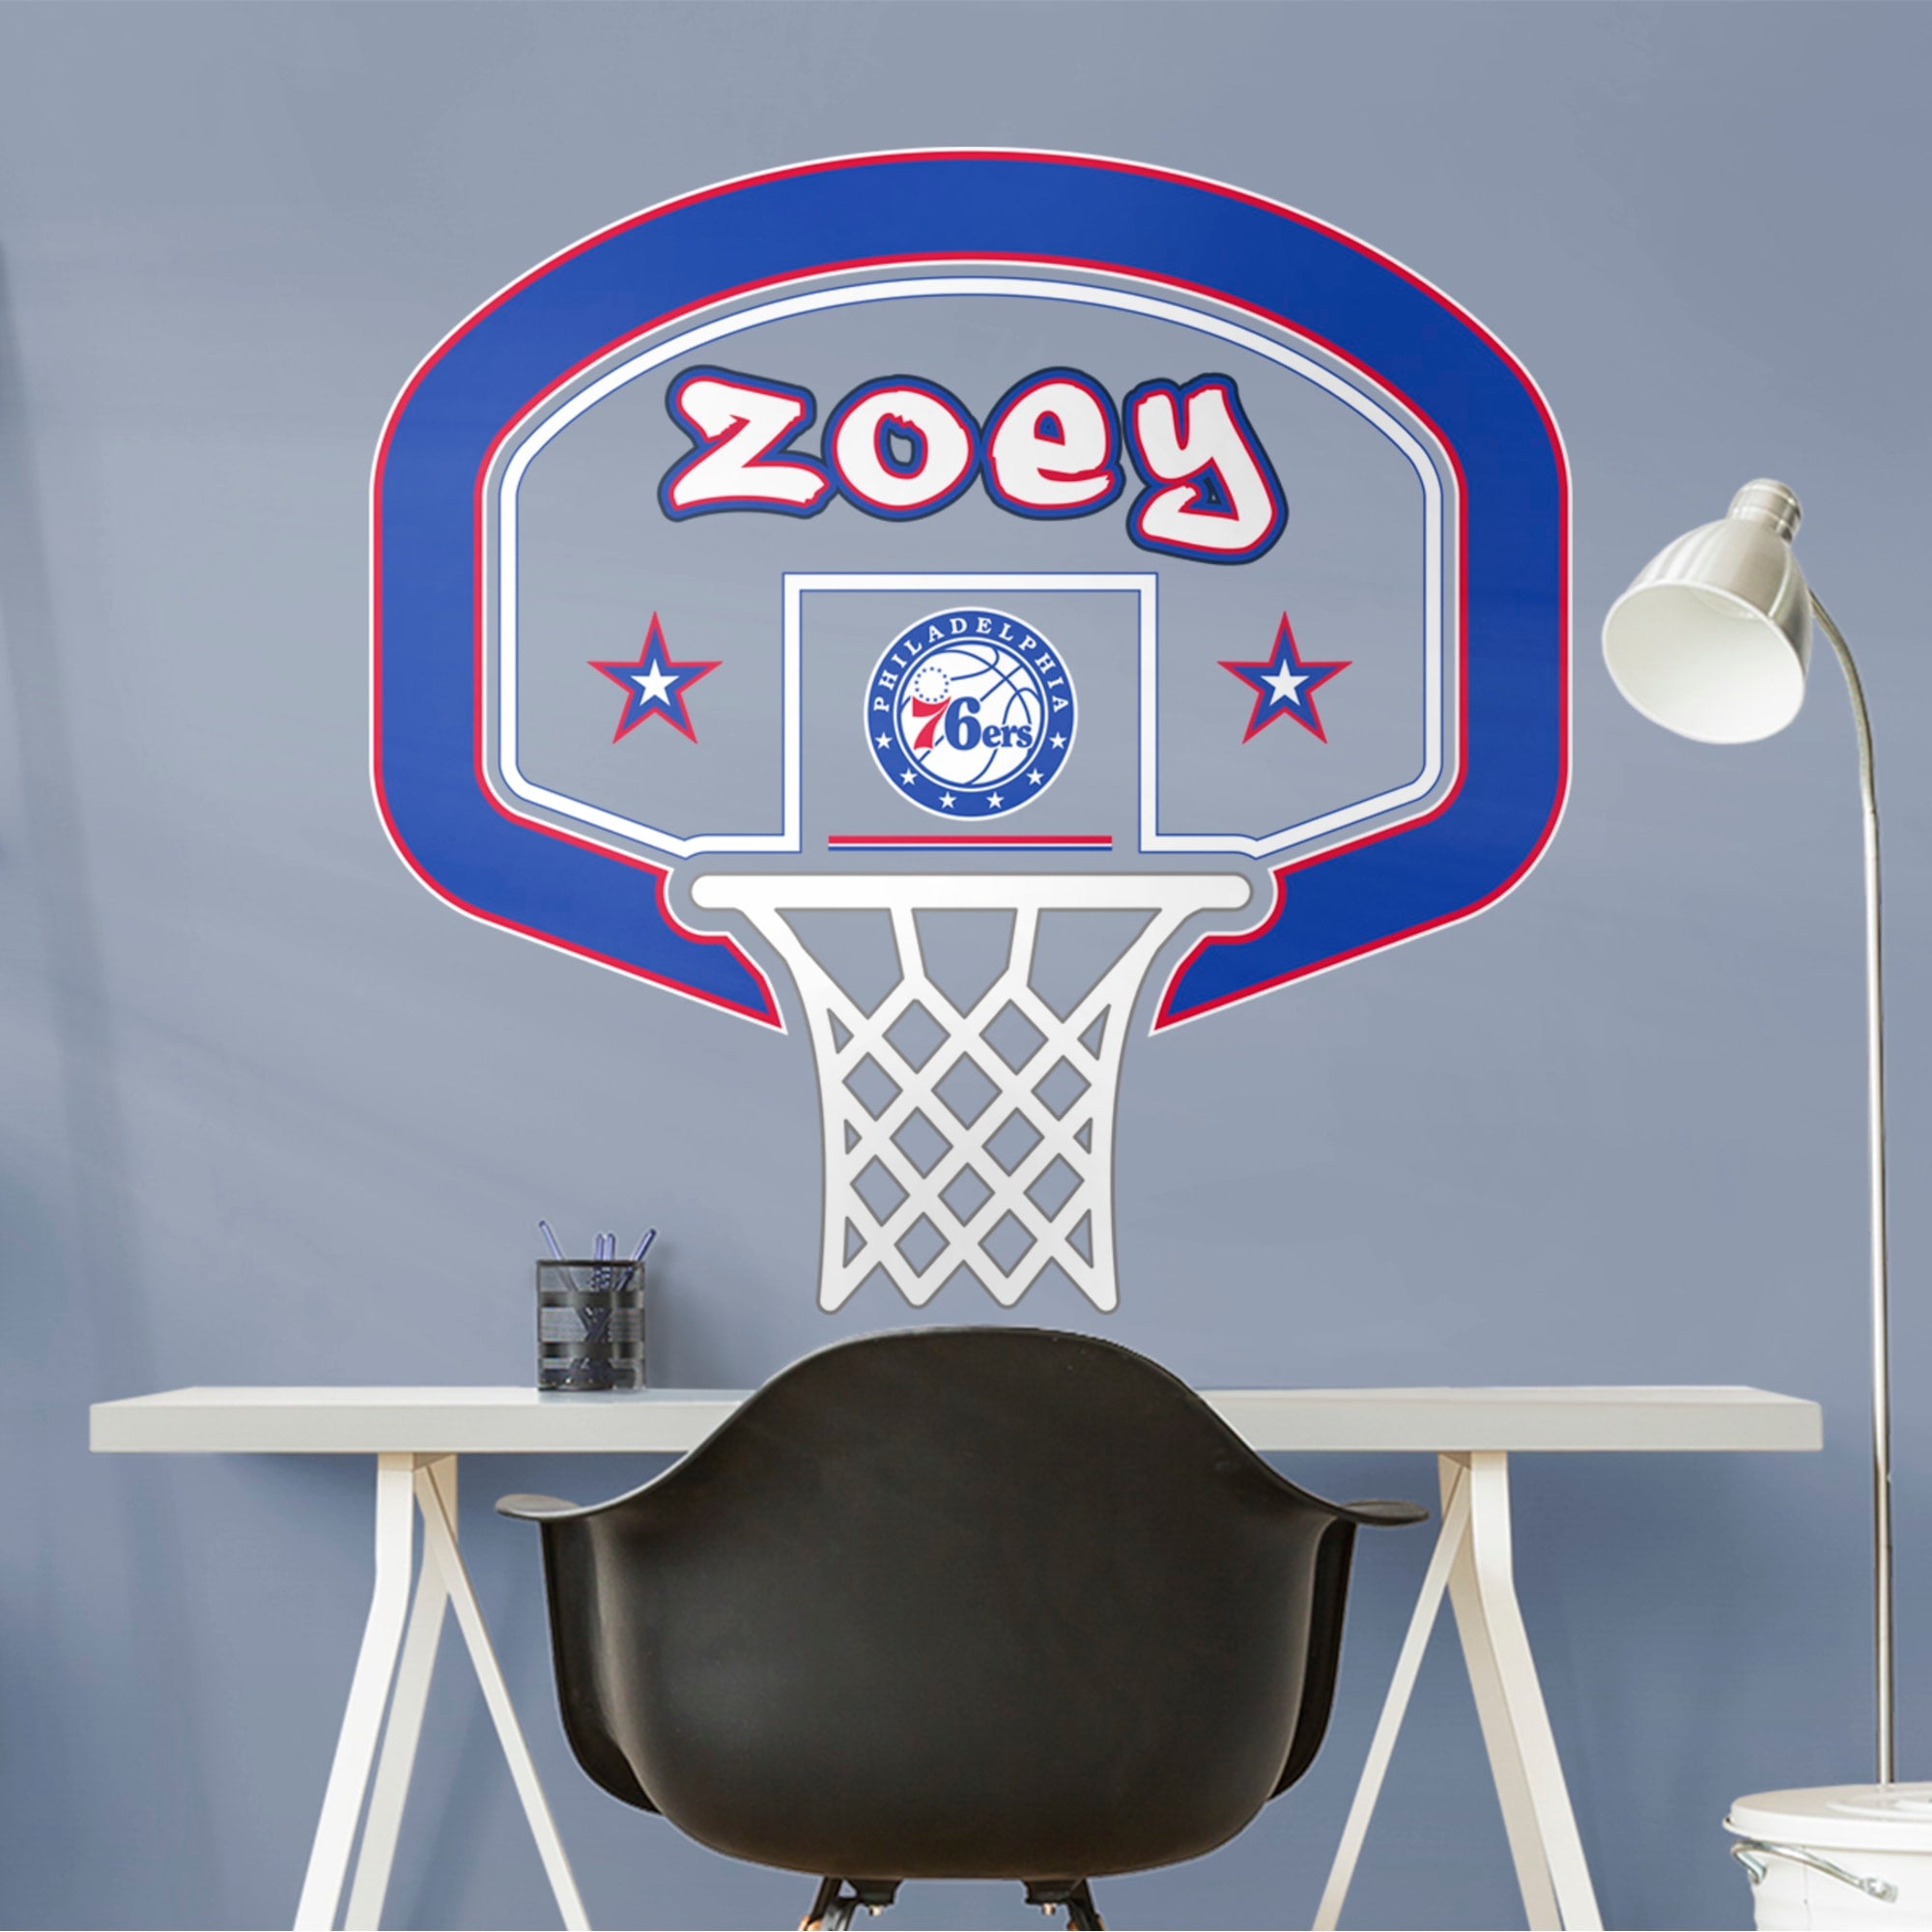 Philadelphia 76ers: Personalized Name - Officially Licensed NBA Transfer Decal 52.0"W x 39.5"H by Fathead | Vinyl